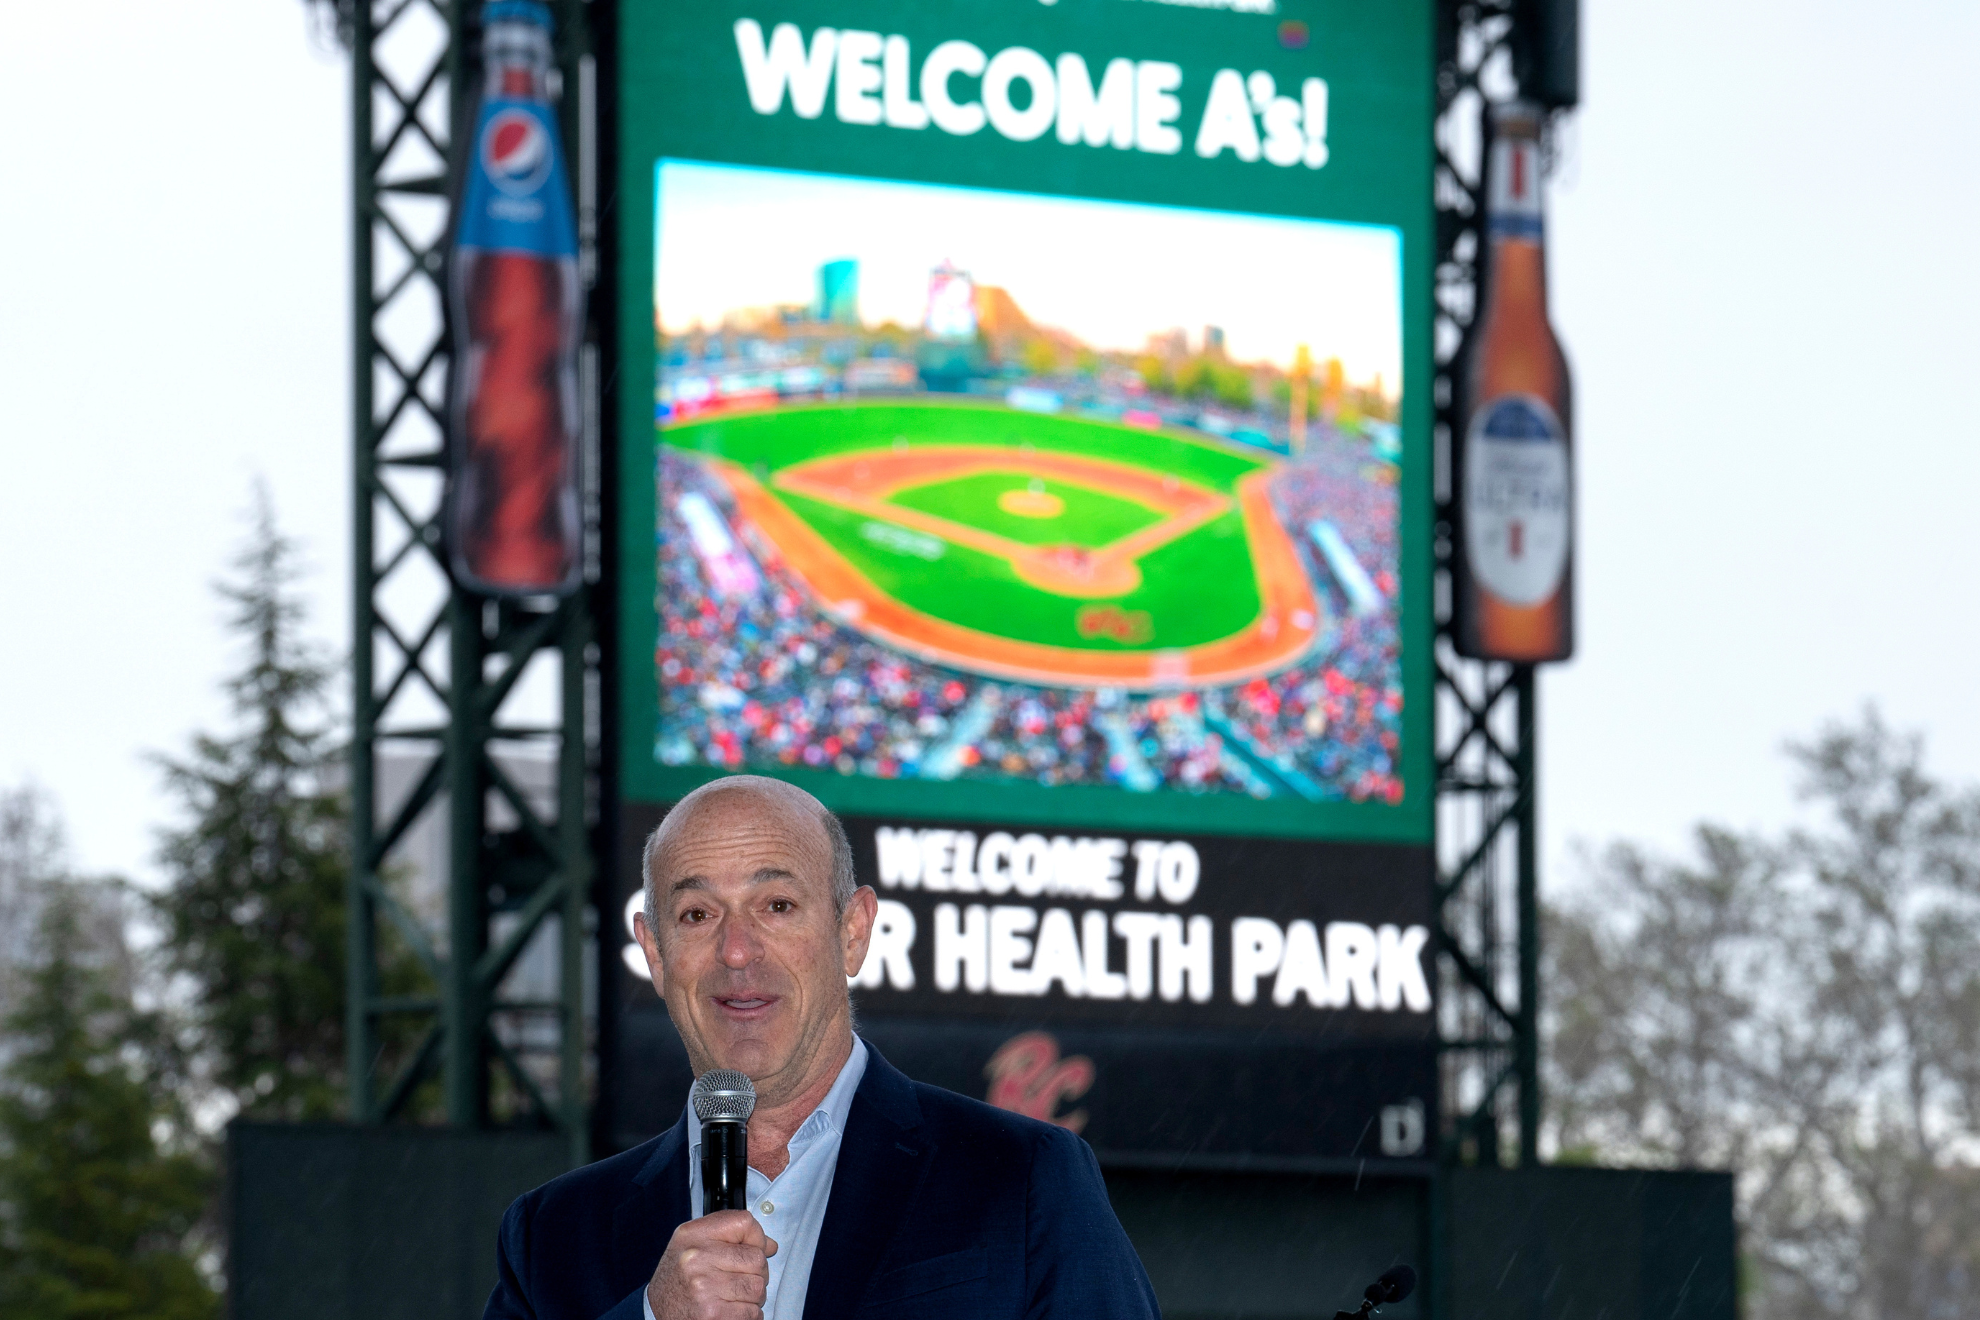 As owner John Fisher introduces Sutter Health Park as his teams new home.